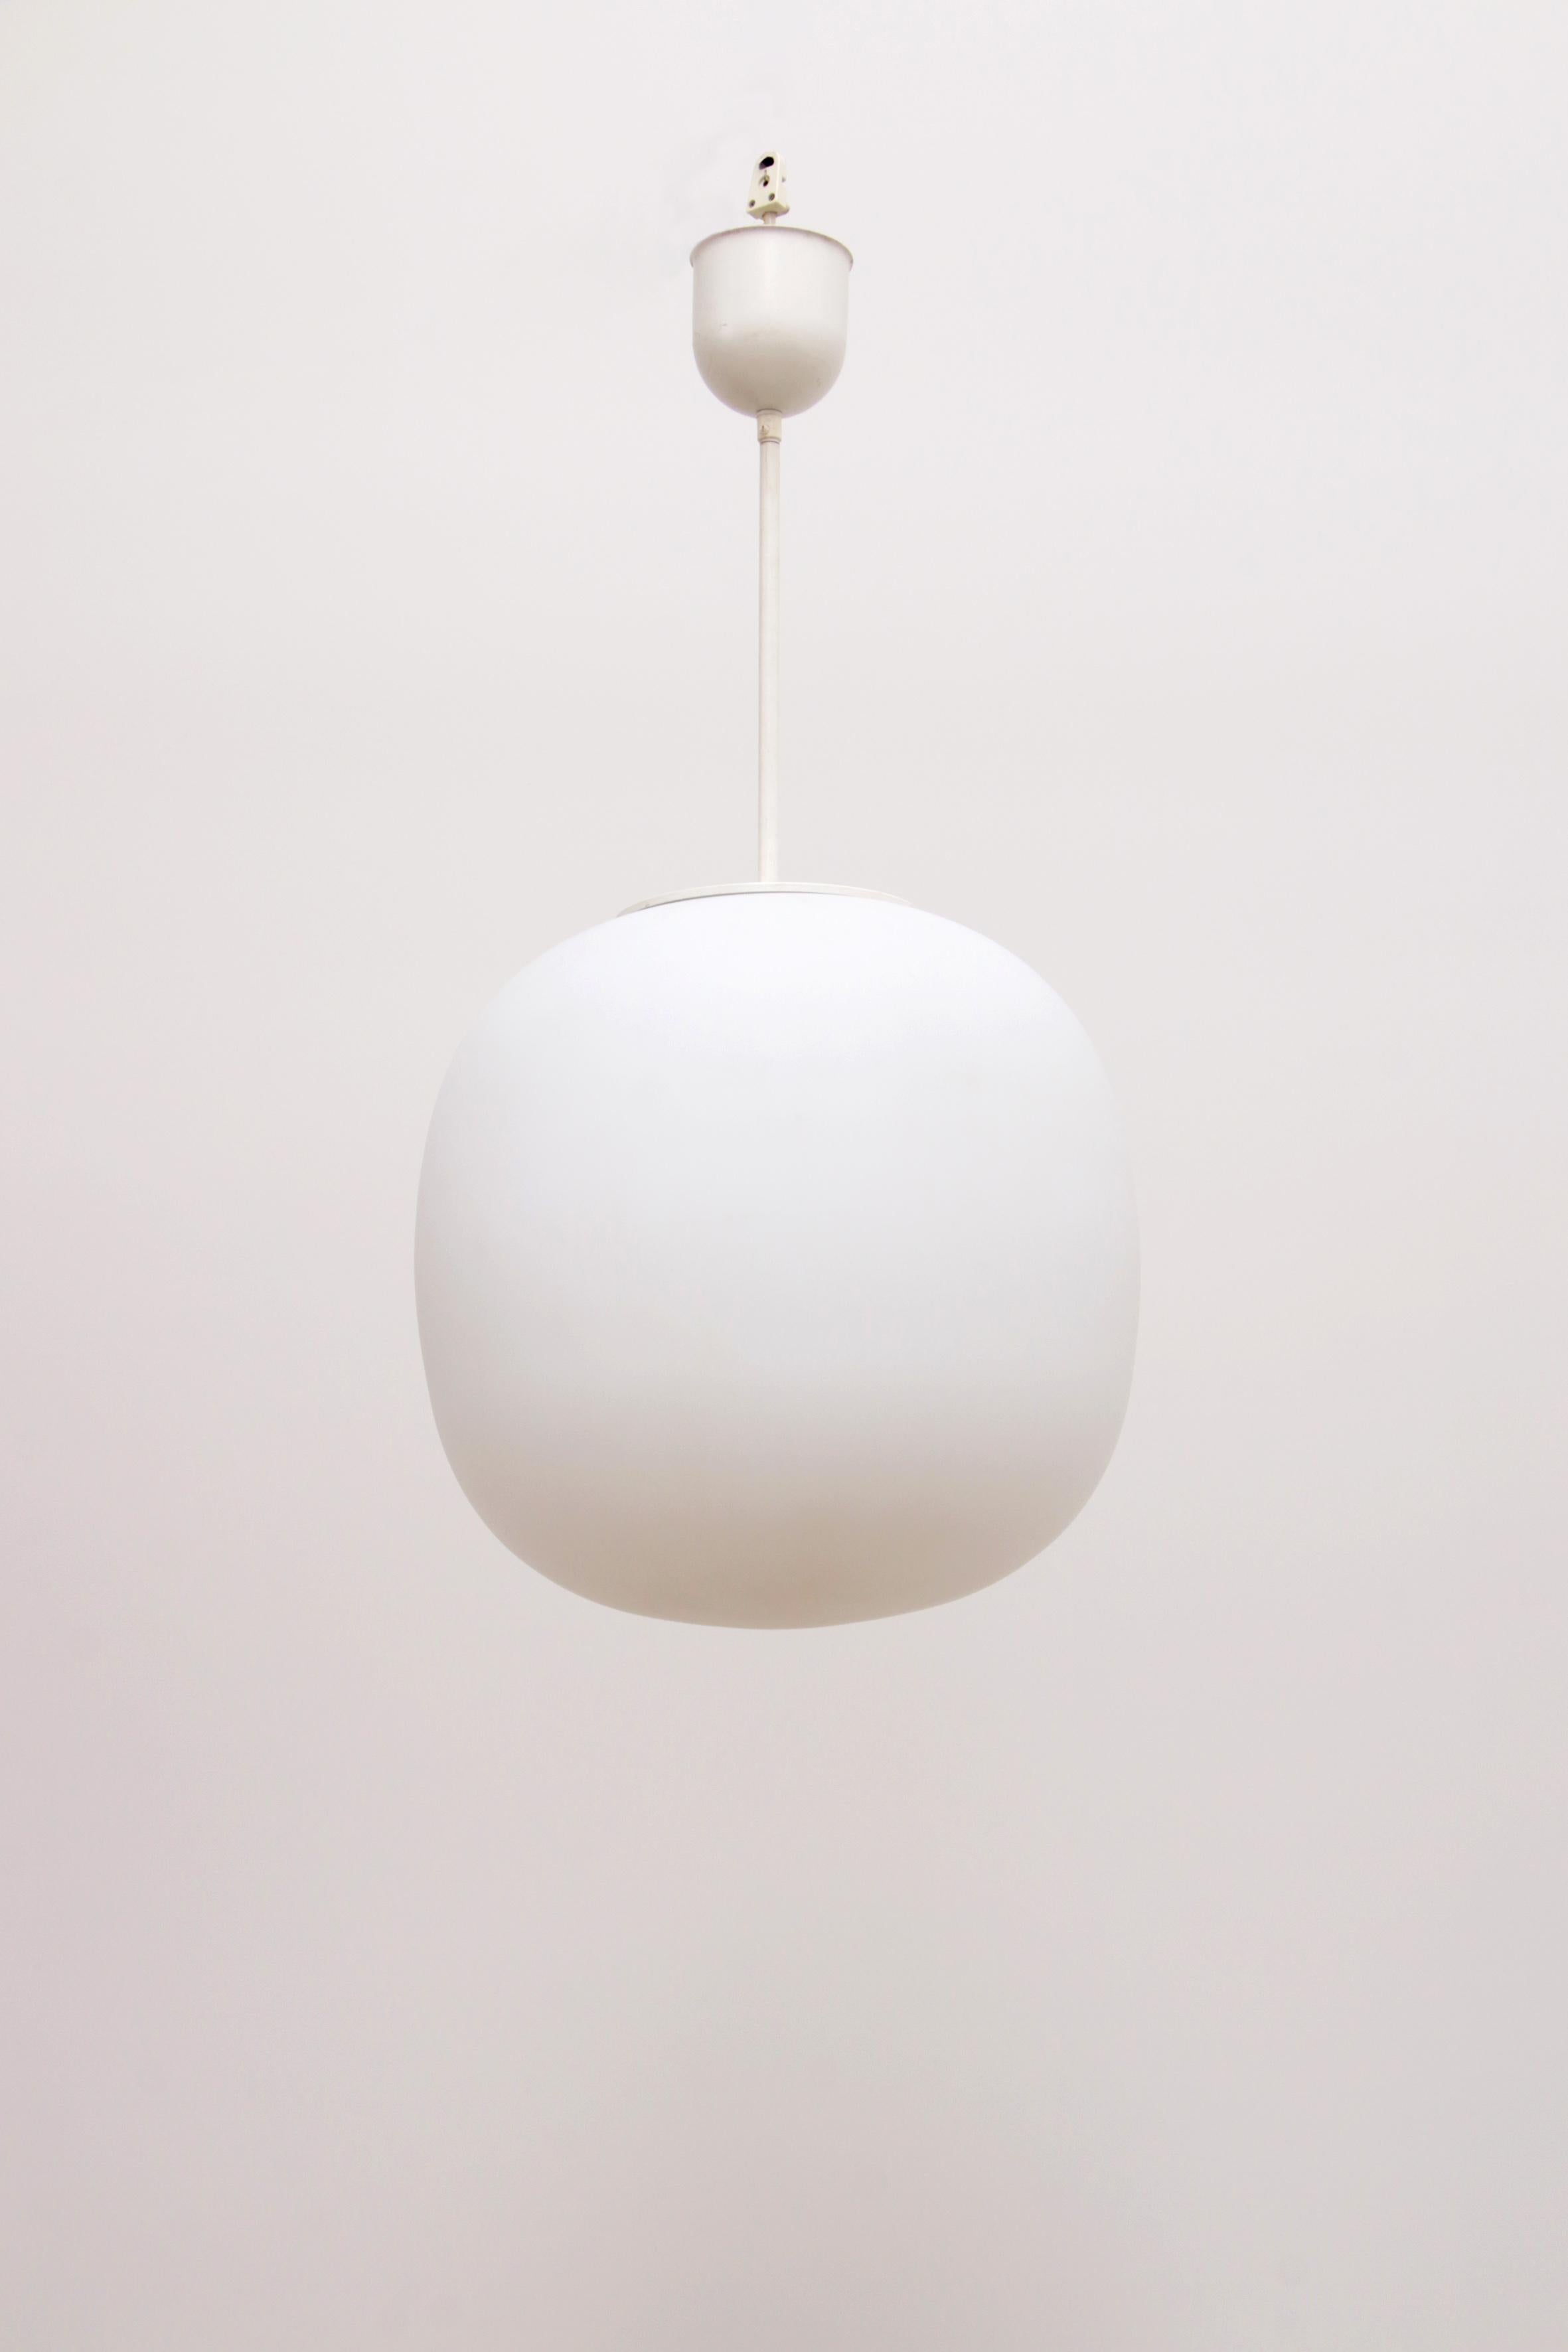 A very large white ball hanging lamp made at Glashutte Limburg in the 1960s.

The lamp is made of glass and has a white color. The glass lamp provides a nice and warm lighting.

This lamp has two R27 fittings.

Sustainable: environmentally